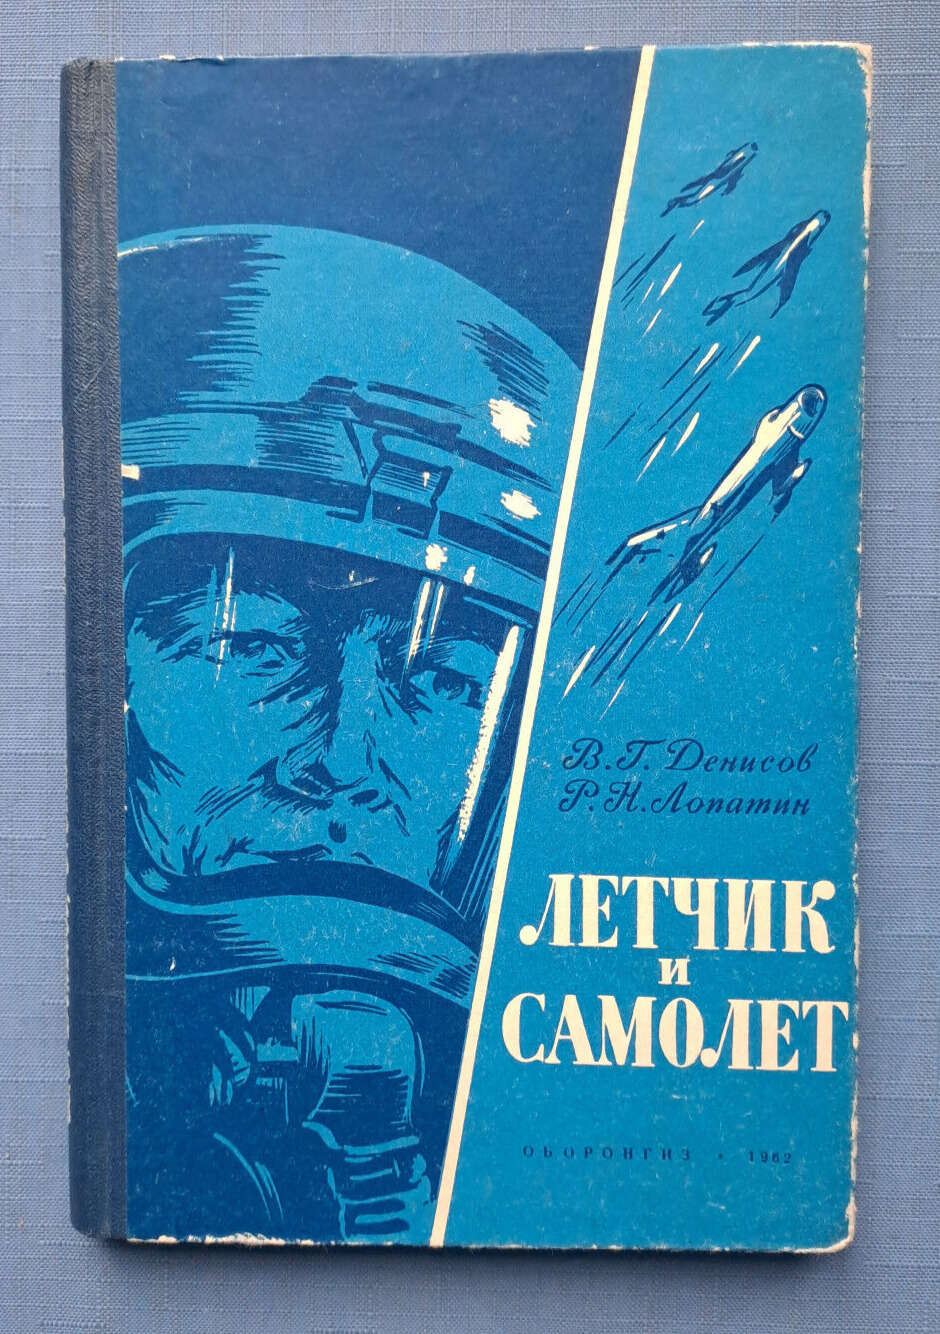 1962 Pilot & plane spacesuit equipment airplane Aviation 14000 only Russian book